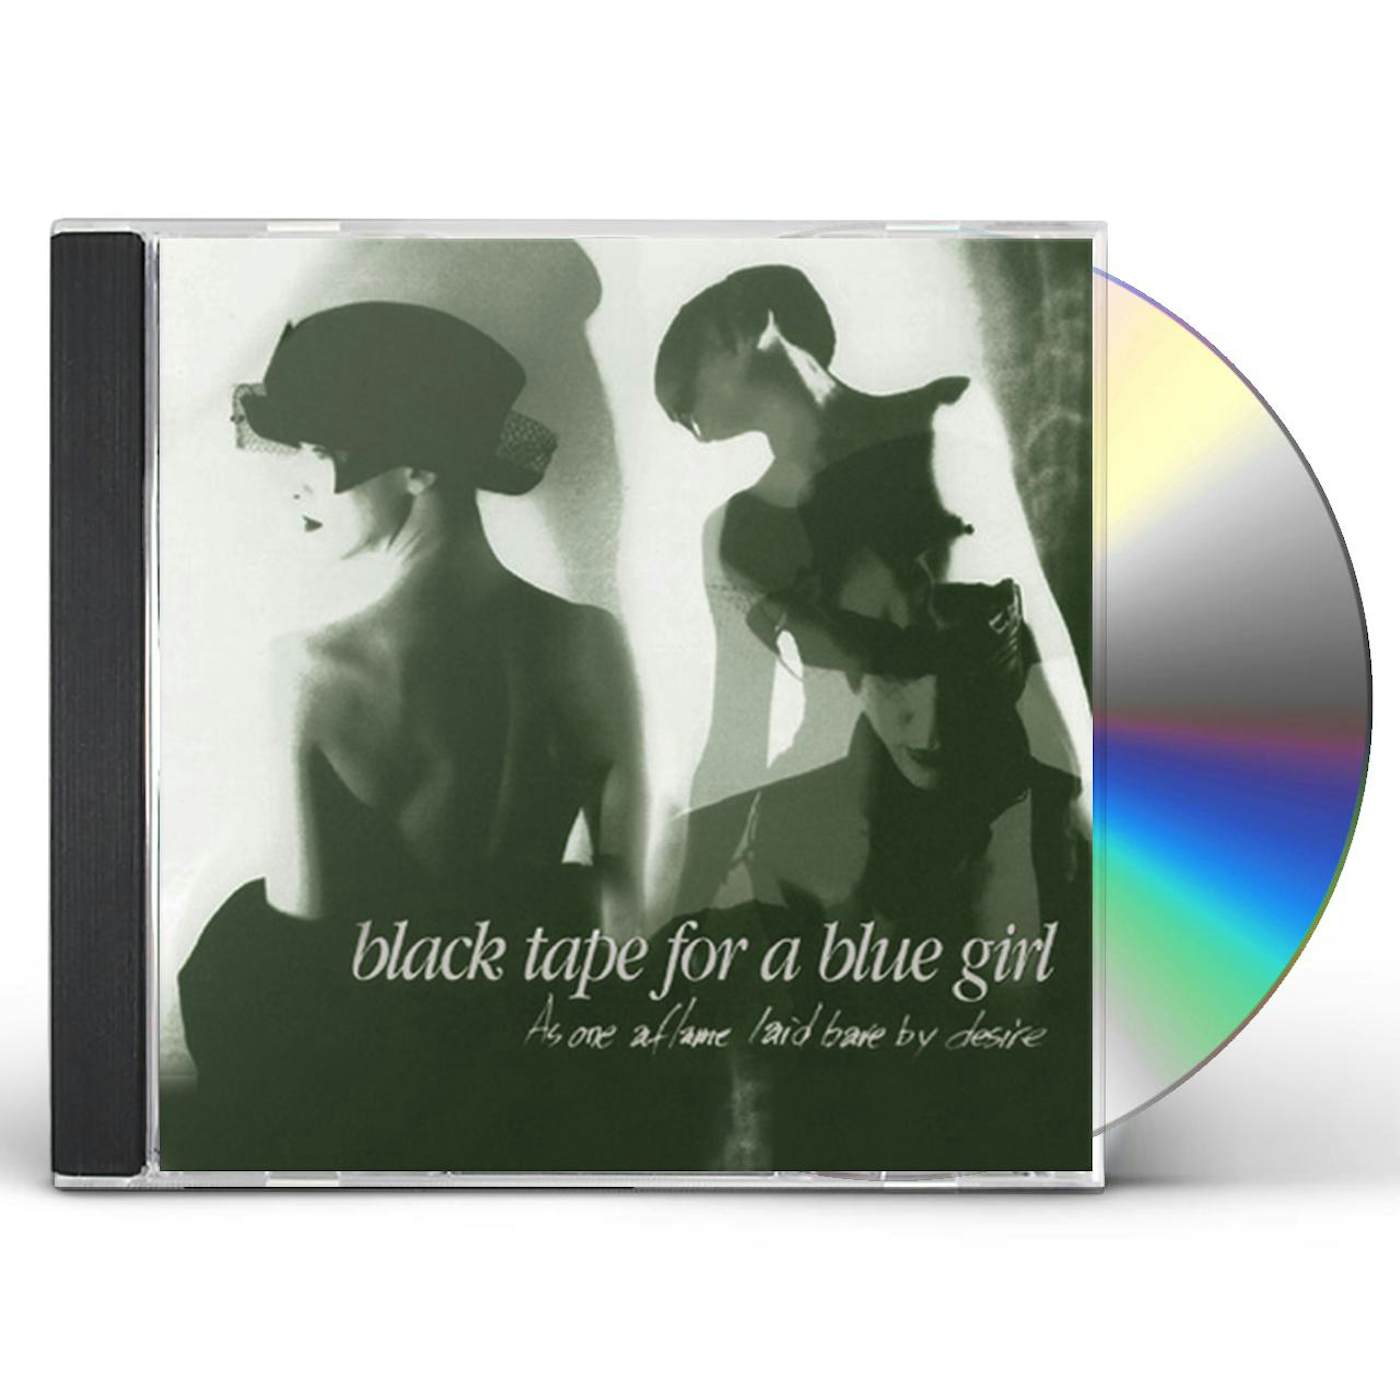 Black Tape For A Blue Girl AS ONE AFLAME LAID BARE BY DESIRE CD